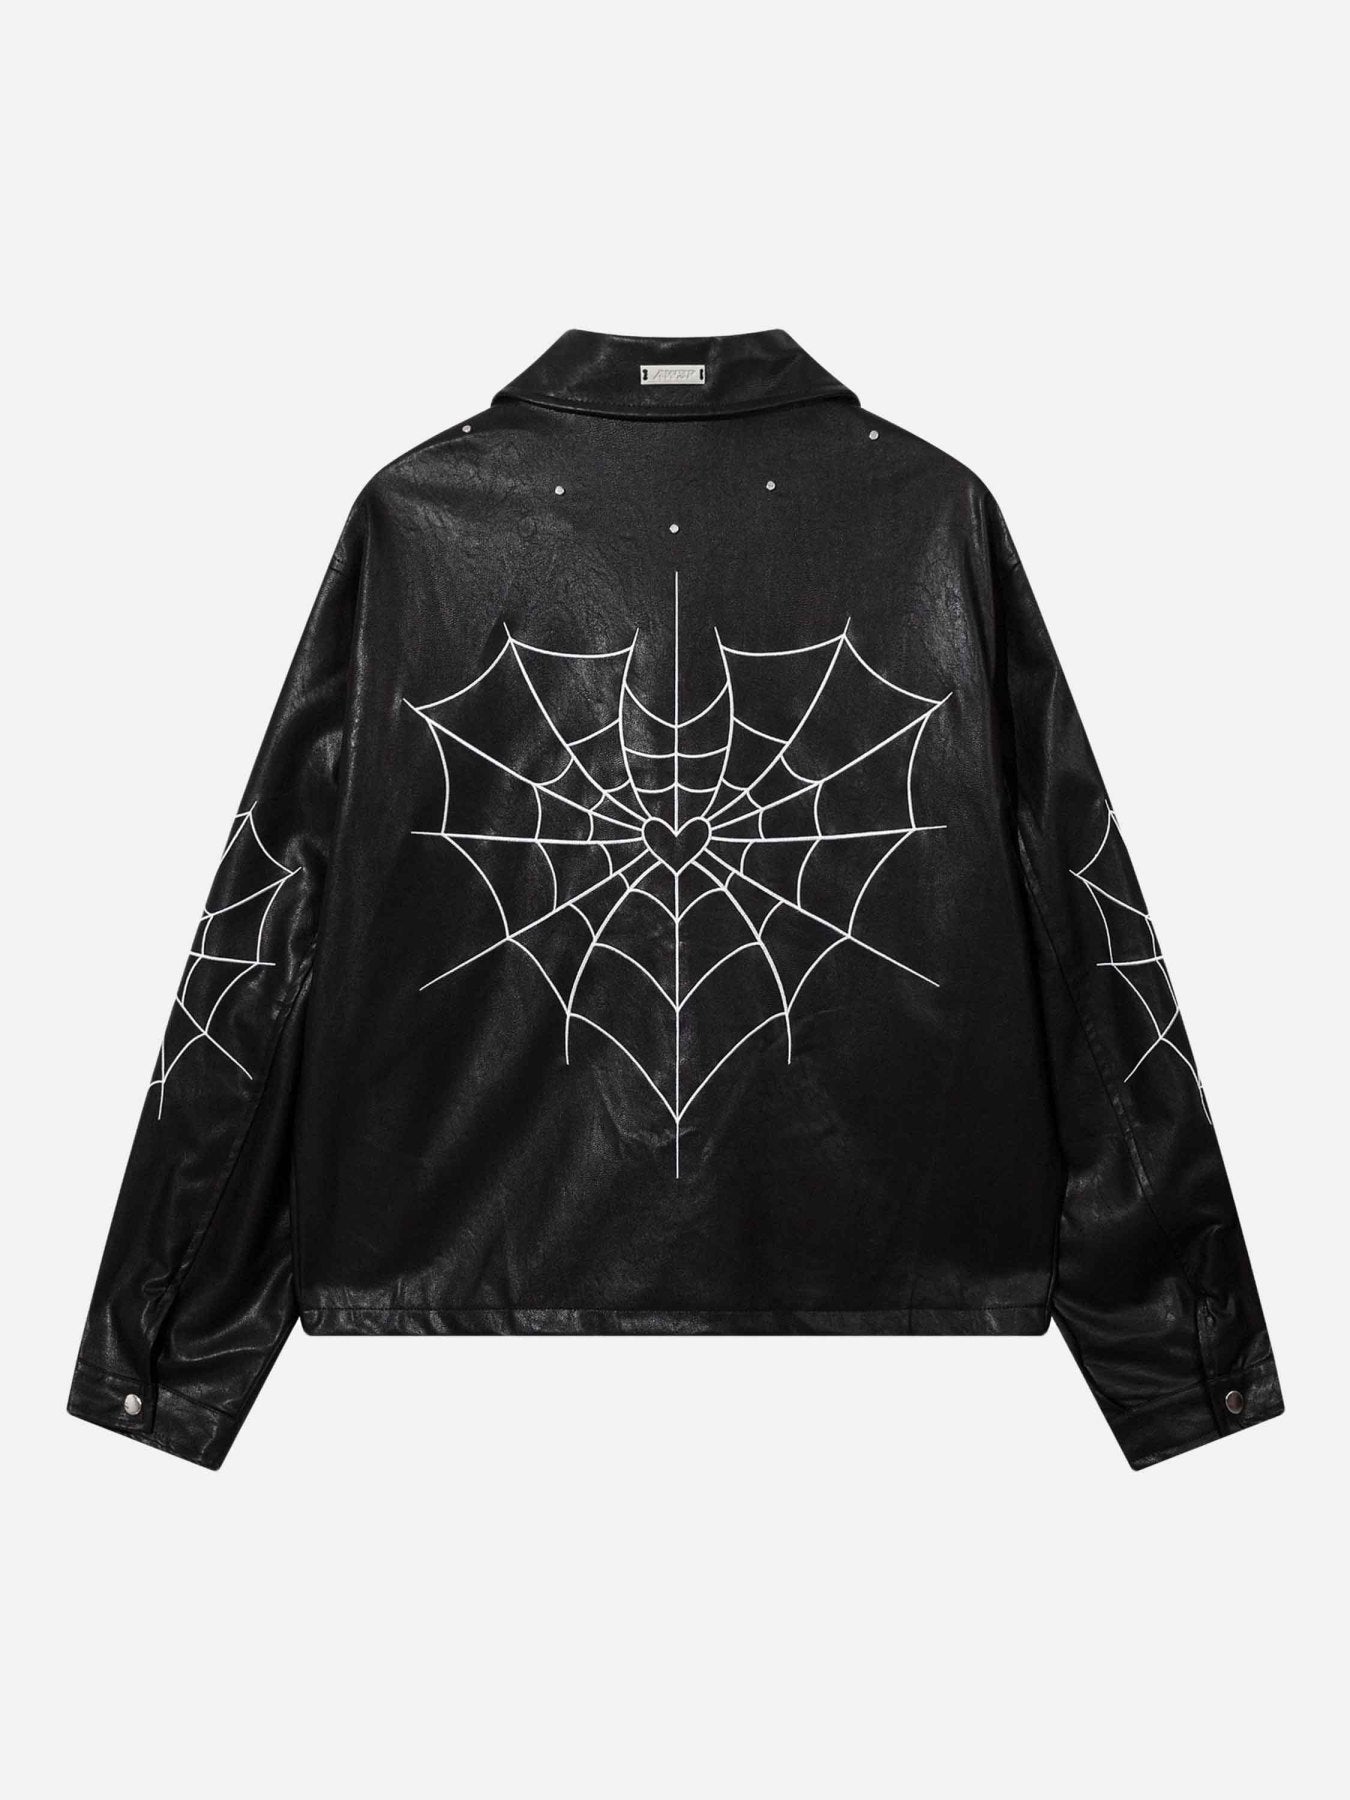 Thesupermade Embroidered Spider Web PU Leather Jacket - 1660